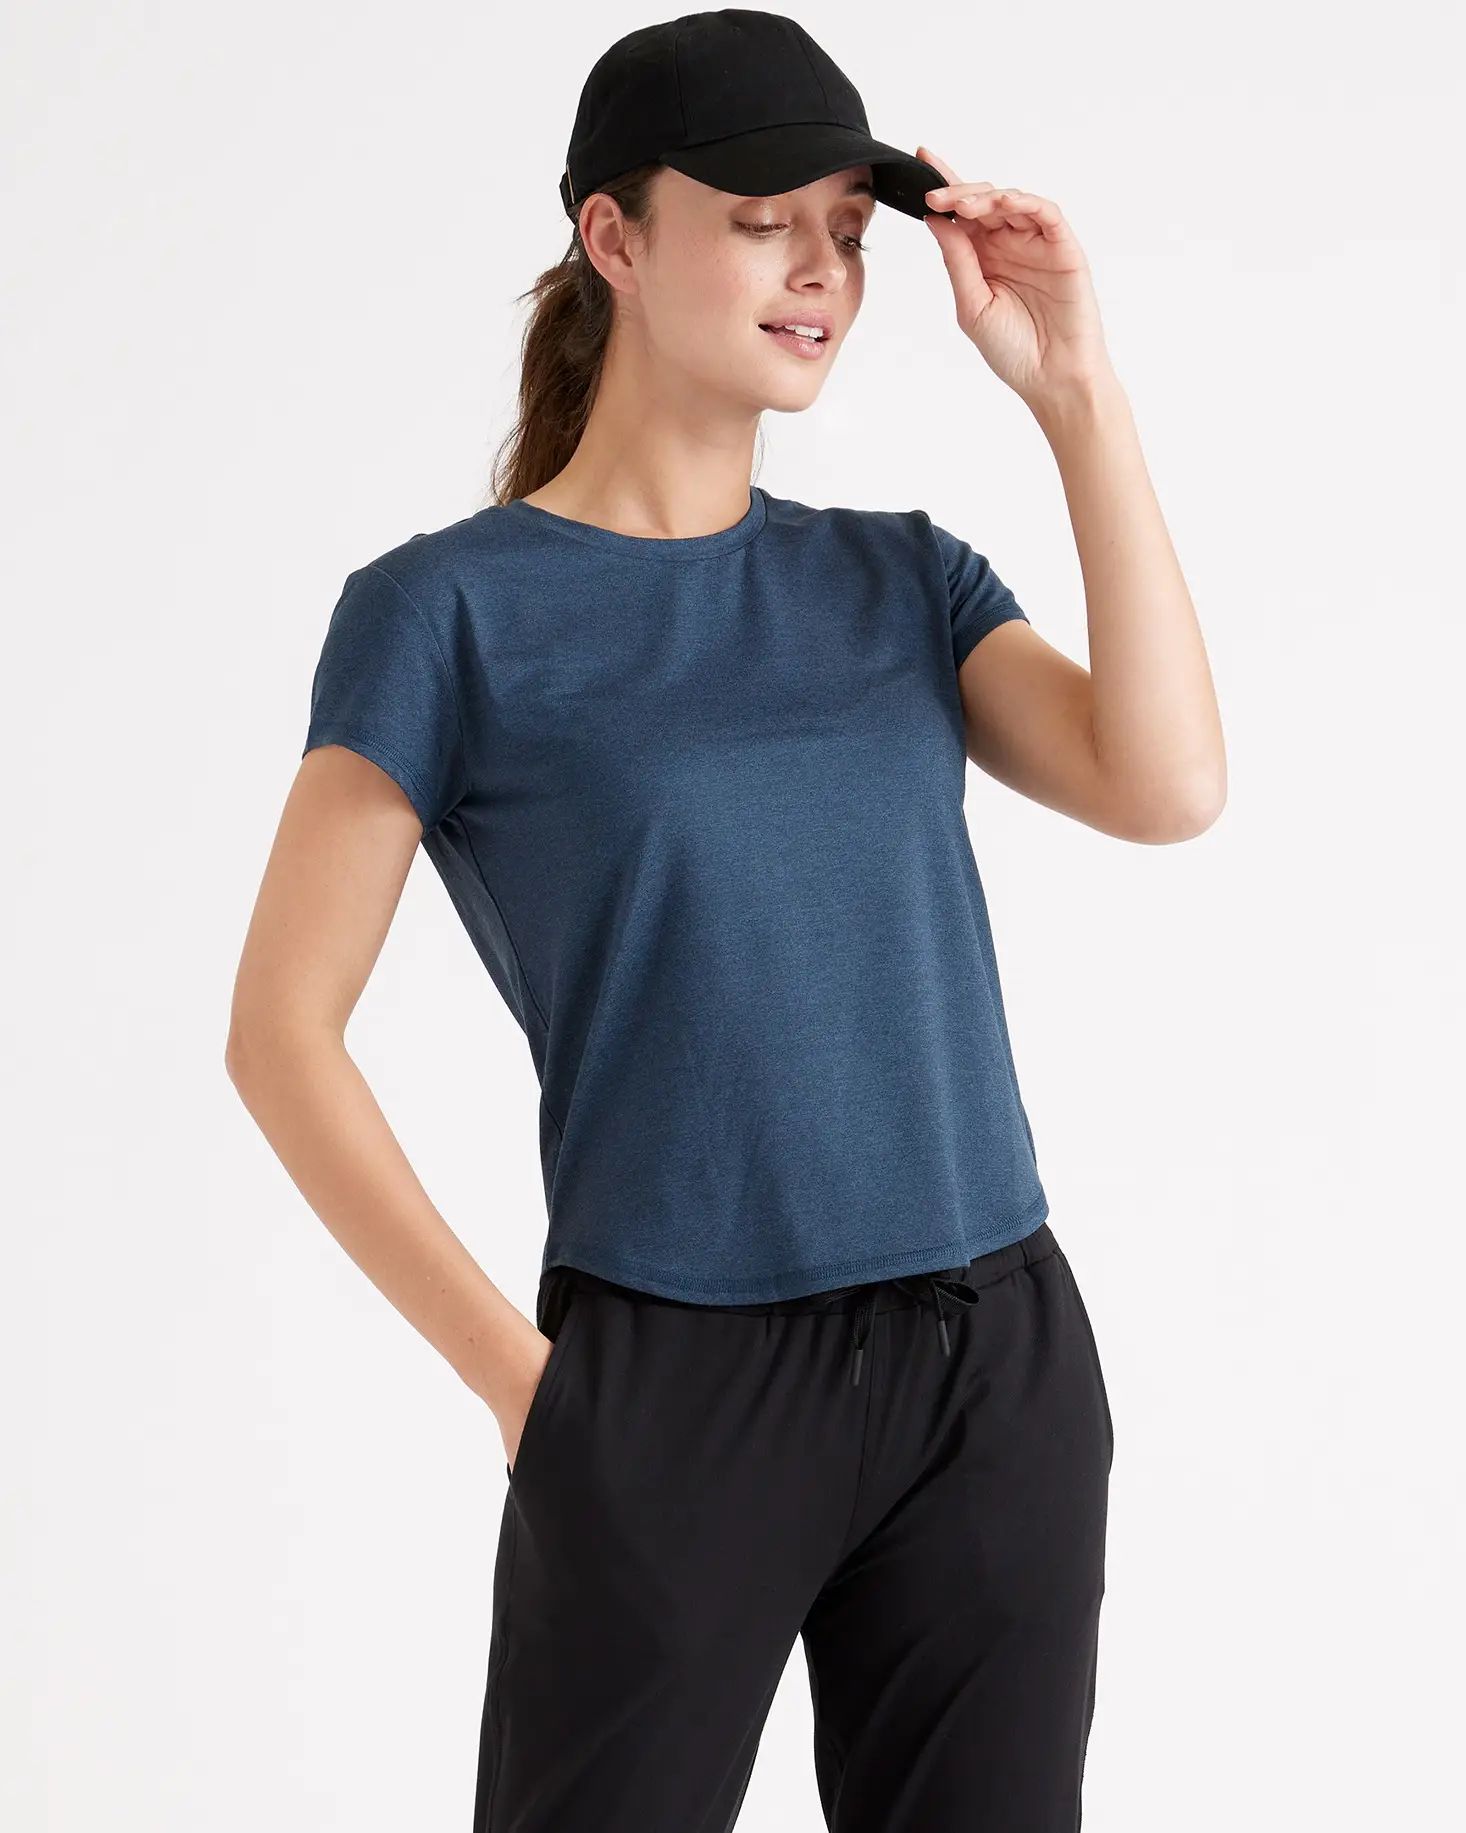 Flowknit Ultra-Soft Performance Tee | Quince